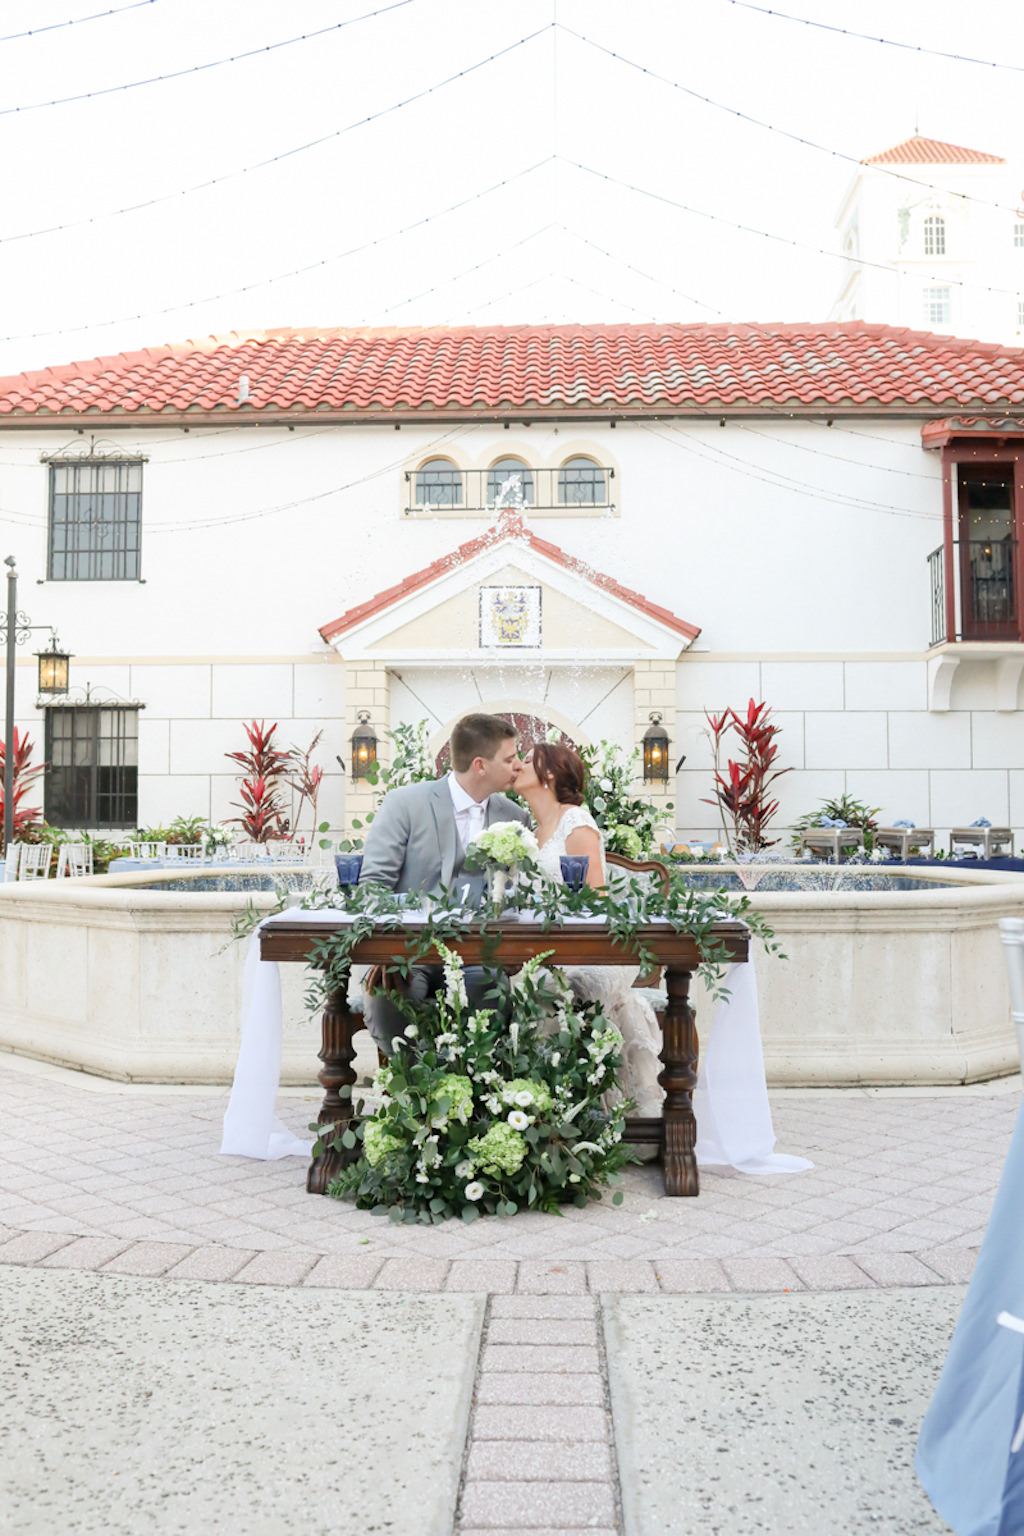 Tampa Bay Bride and Groom at Sweetheart Table Courtyard Wedding Reception Portrait, Wooden Table with Rustic Elegant Greenery, White, and Ivory Floral Arrangements | Wedding Photographer Lifelong Photography Studios | Wedding Planner Kelly Kennedy Weddings and Events | Wedding Venue Bishop Museum of Science and Nature